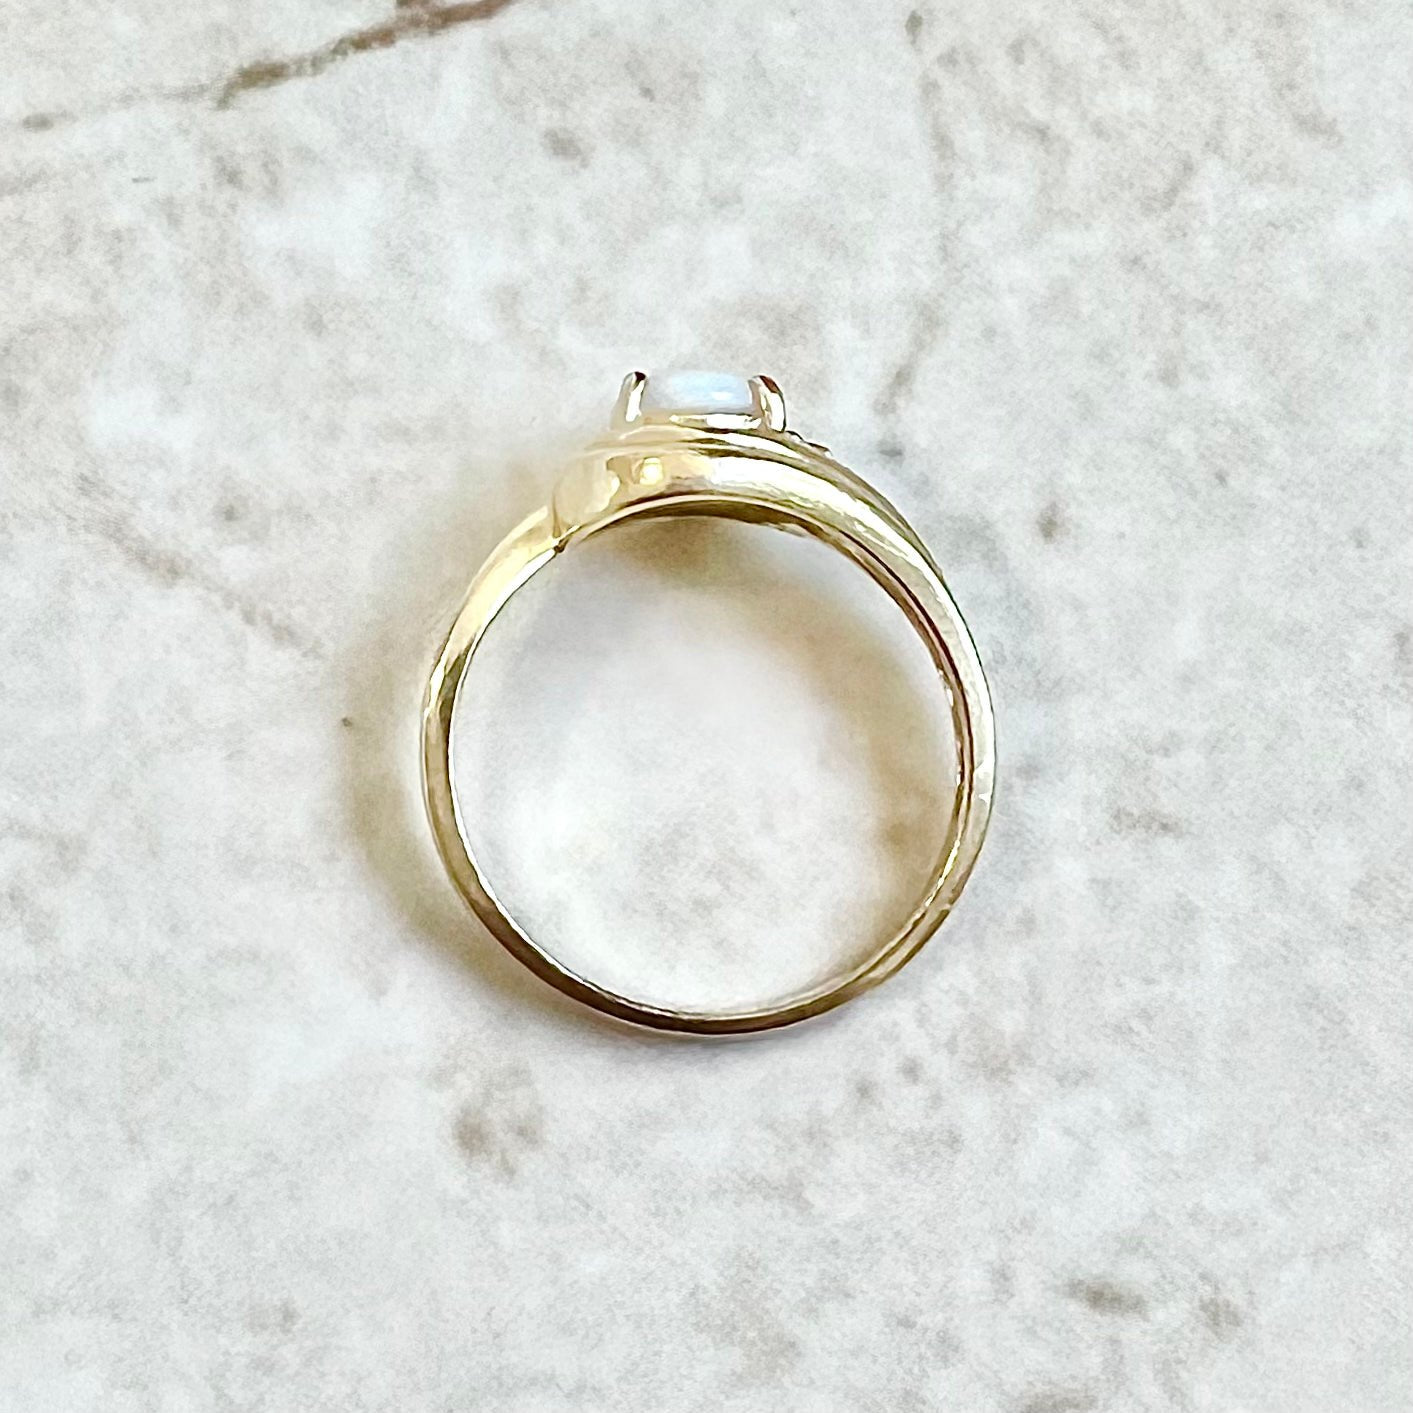 CLEARANCE 40% OFF - Vintage 14 Karat Yellow Gold Natural Opal & Diamond Cocktail Ring - WeilJewelry